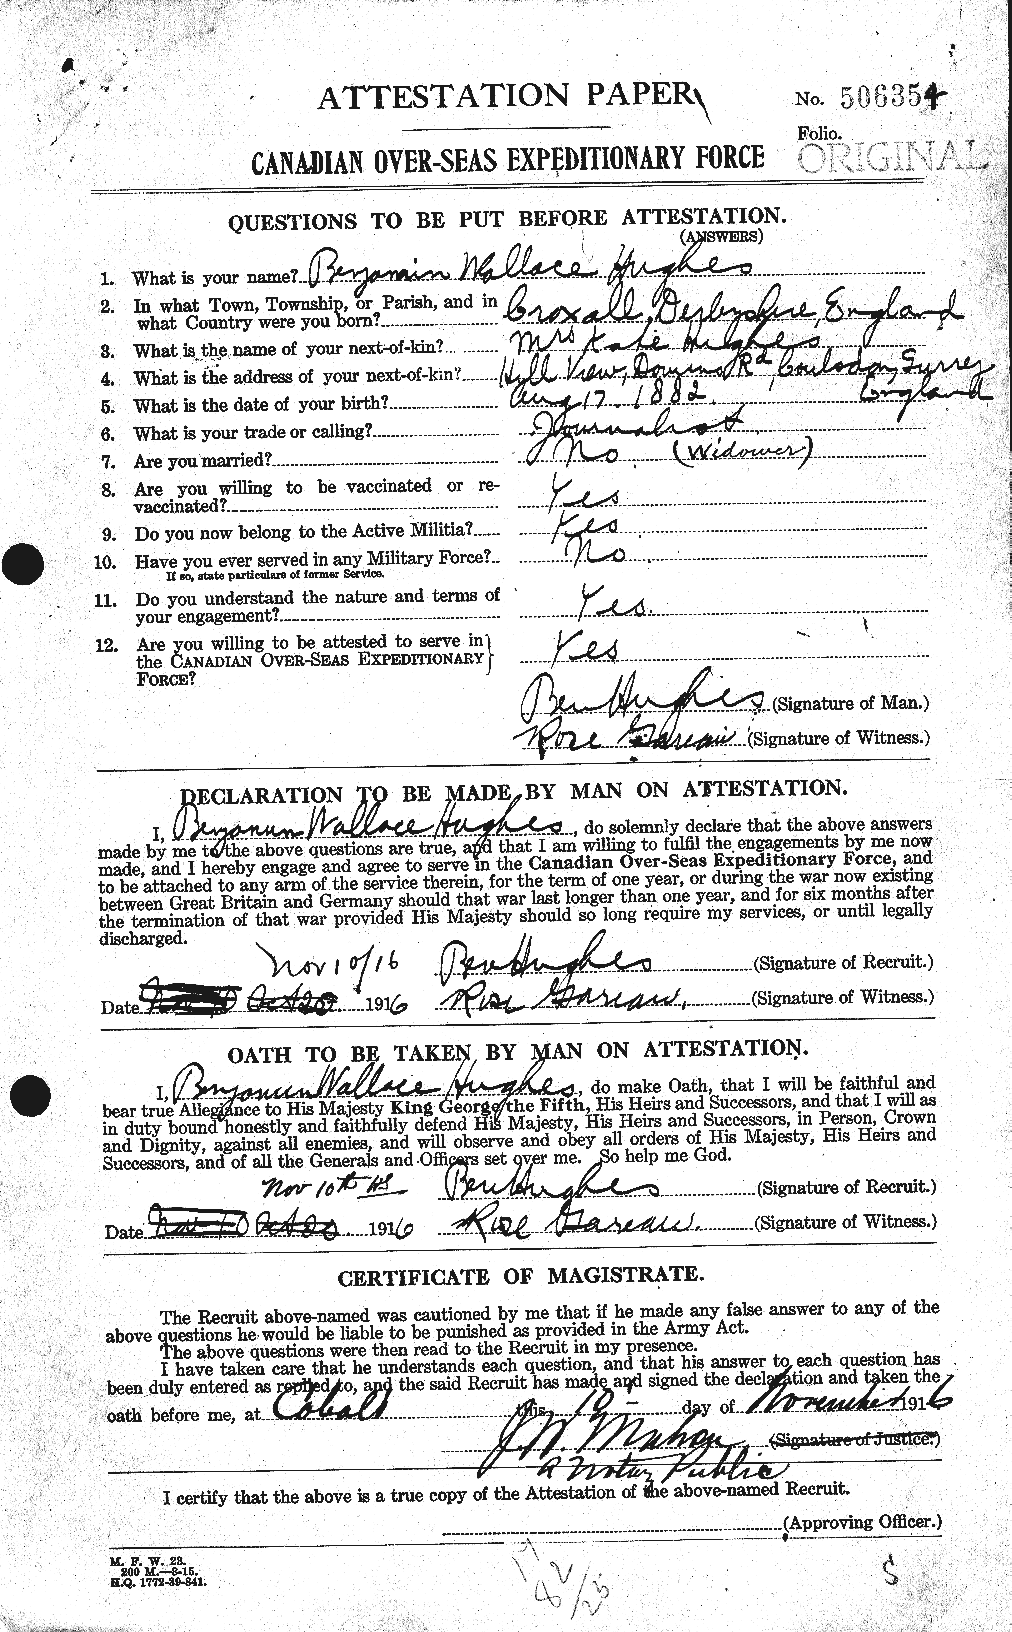 Personnel Records of the First World War - CEF 402579a